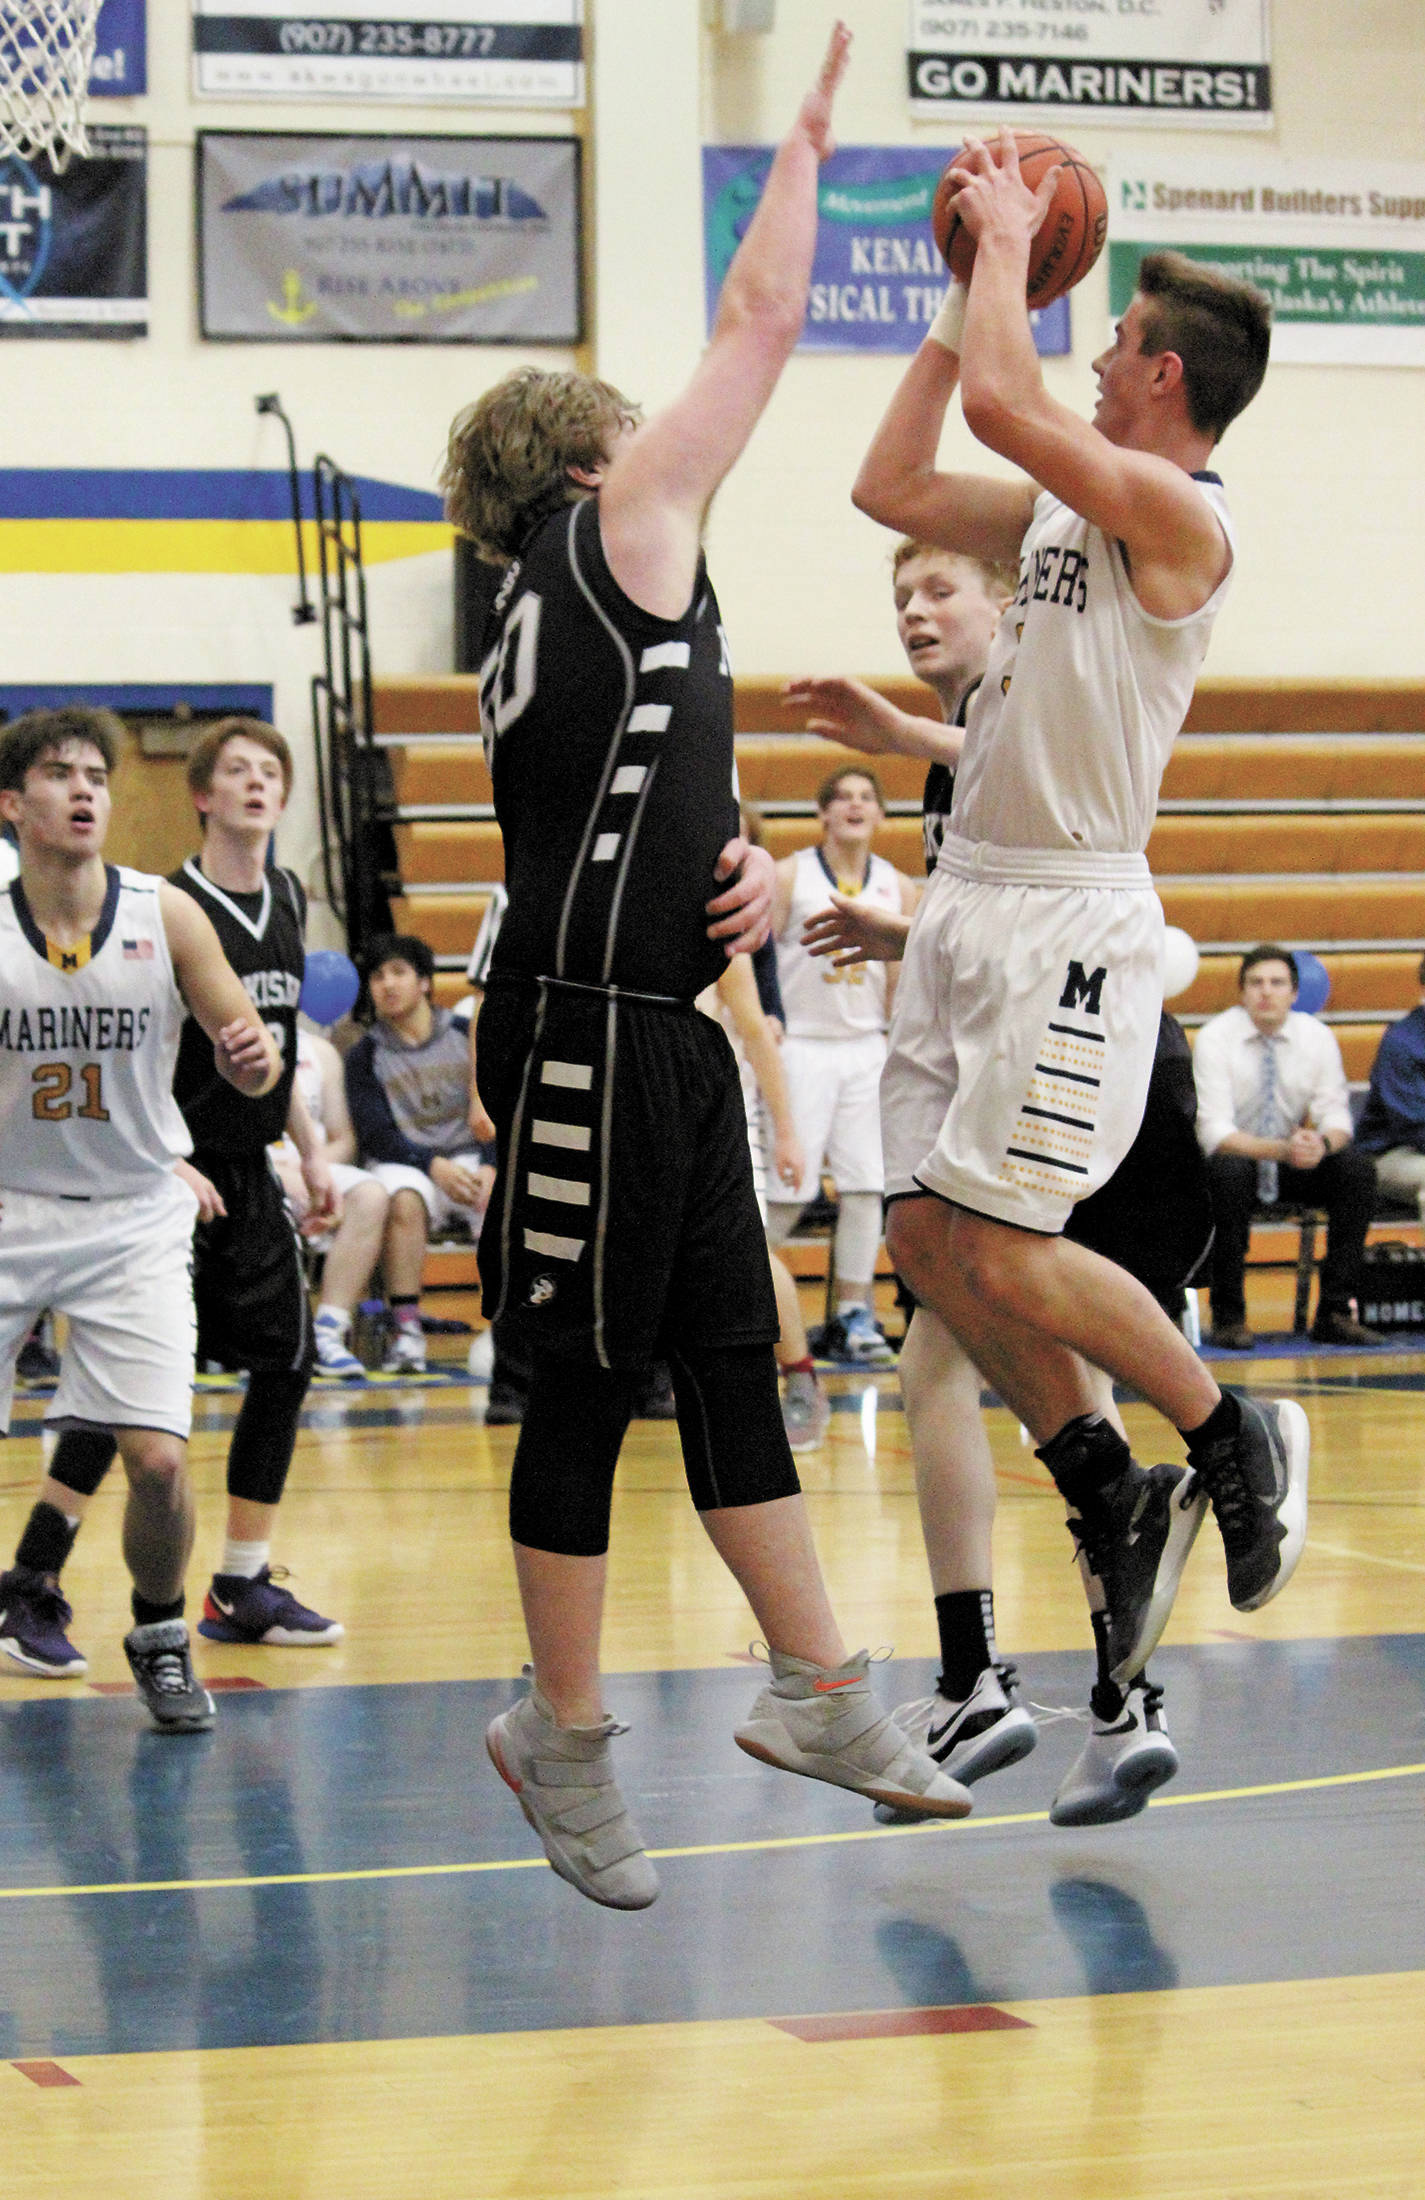 Homer’s Clayton Beachy jumps to take a shot while Nikiski’s Drew Handley reaching to block him during a Friday, Feb. 28, 2020 basketball game in the Alice Witte Gymnasium in Homer, Alaska. (Photo by Megan Pacer/Homer News)